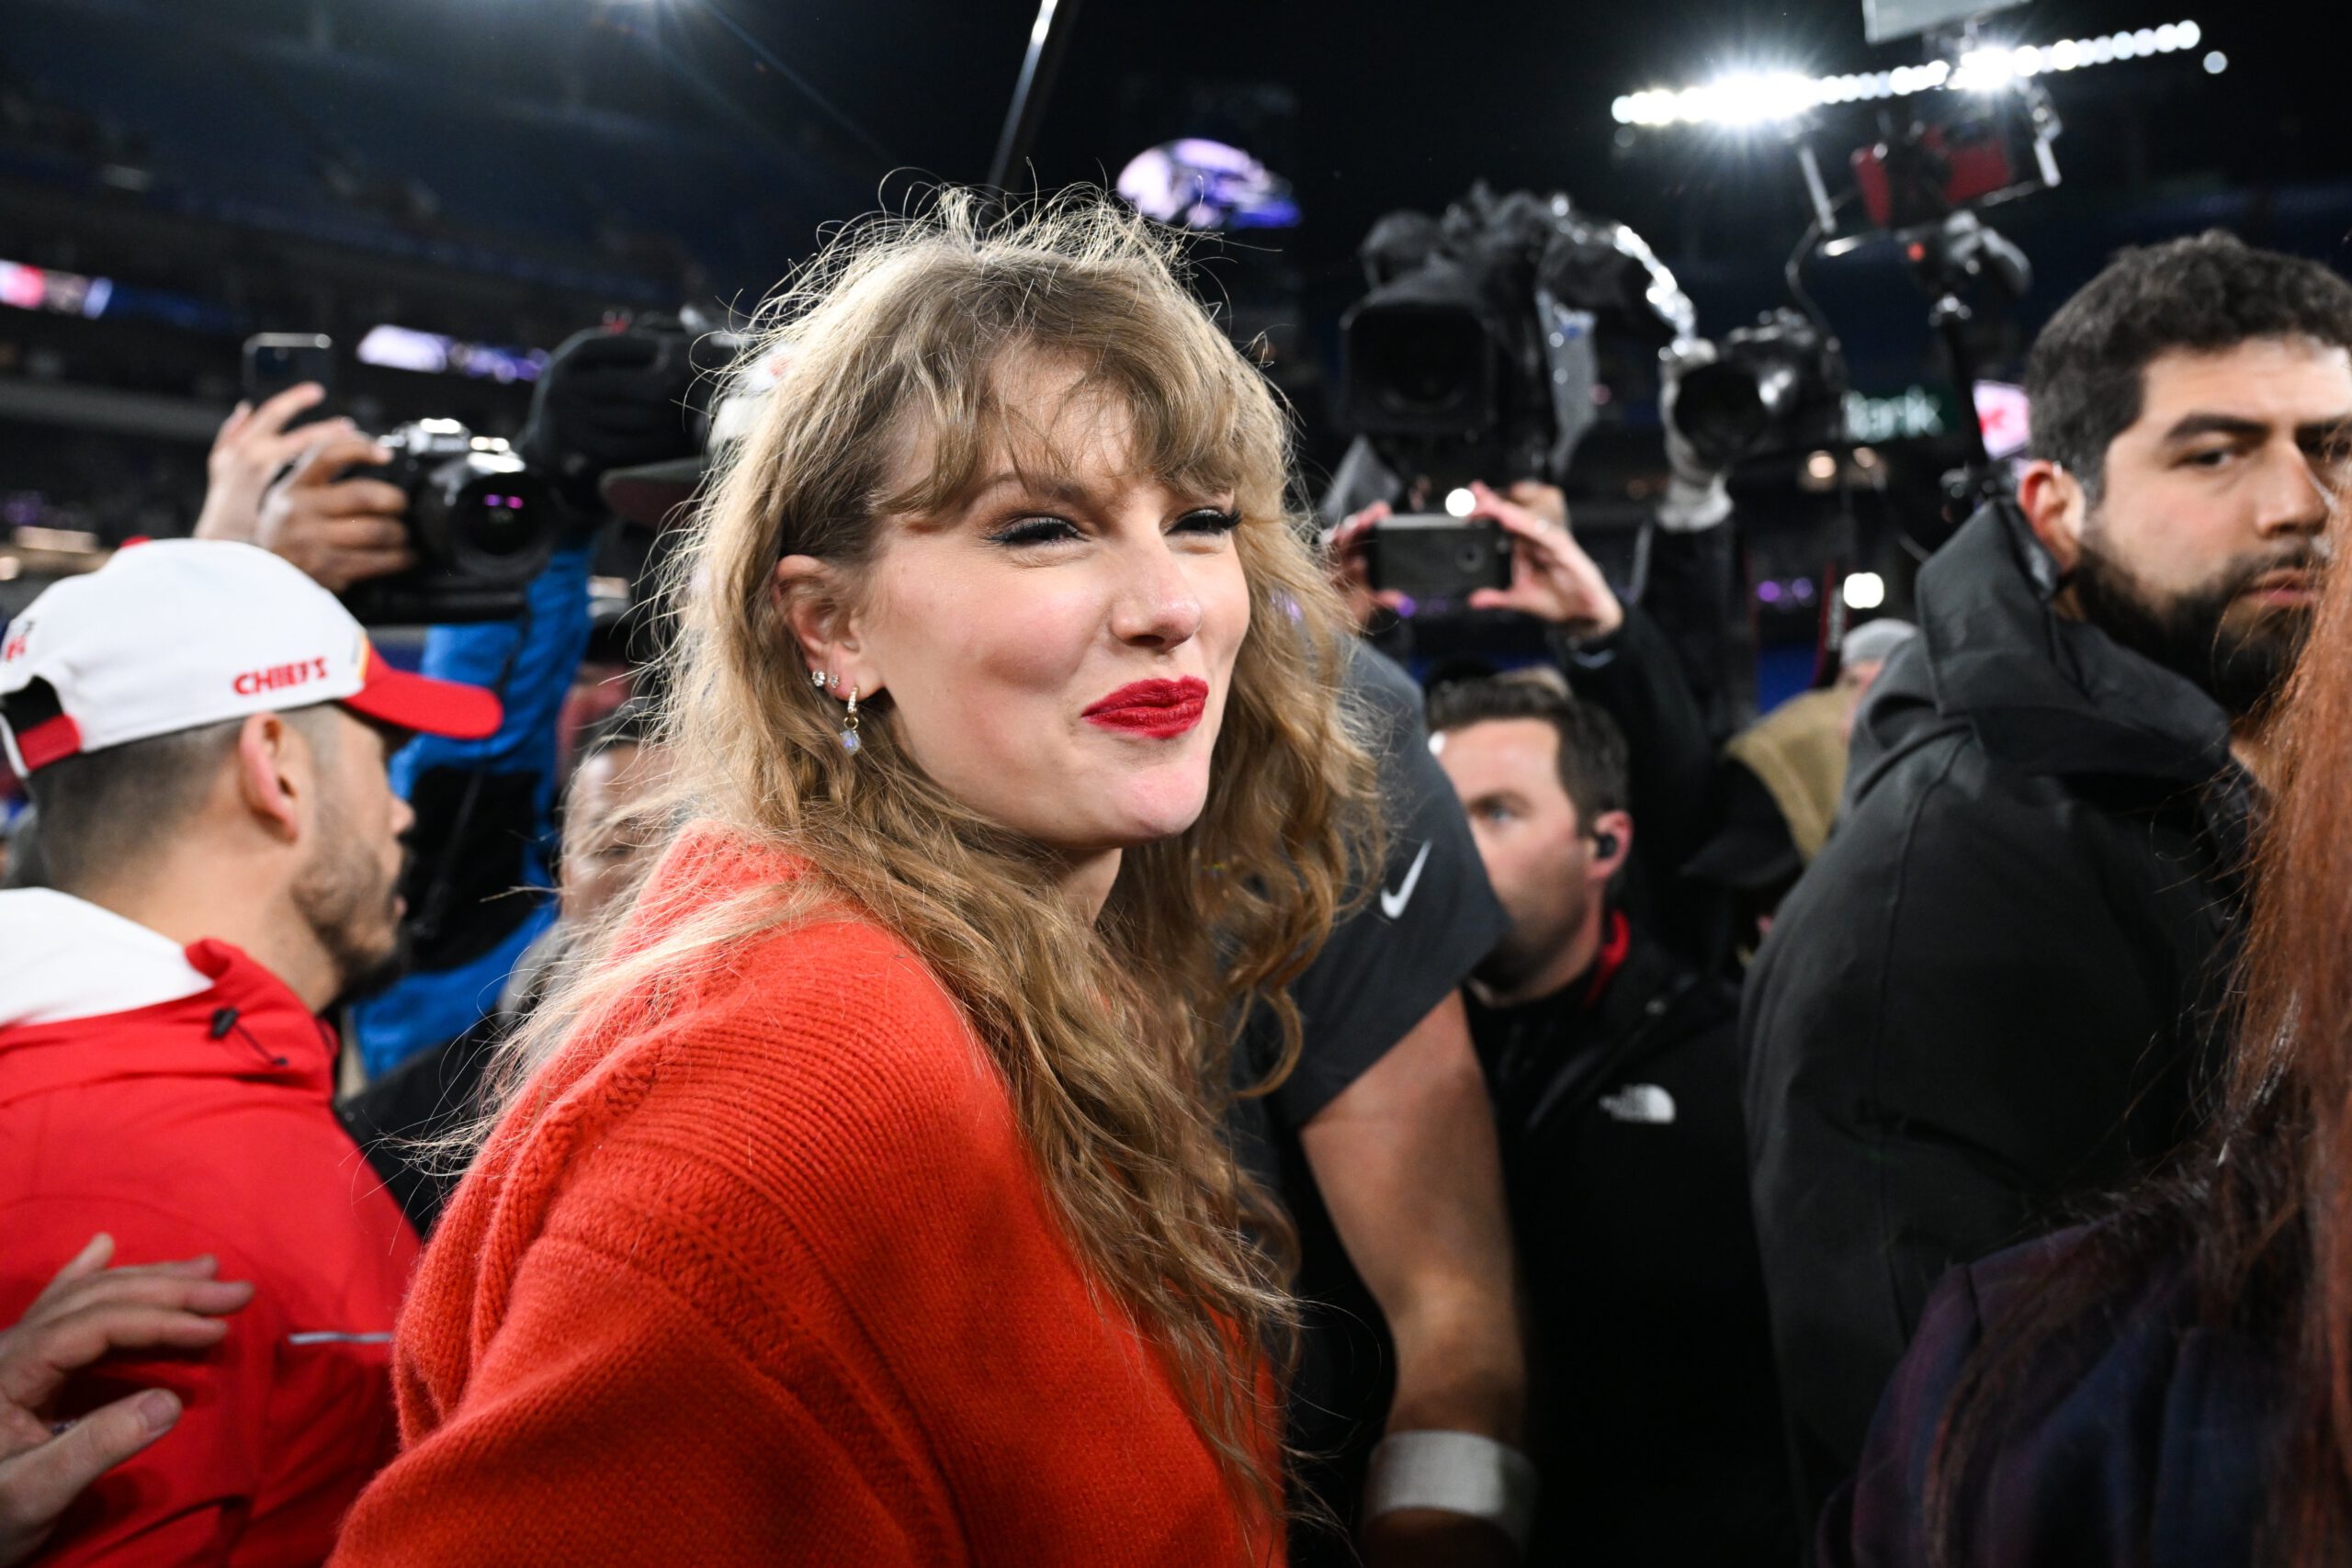 Taylor Swift in a red sweater on the field celebrating the Kansas City Cheifs' win.